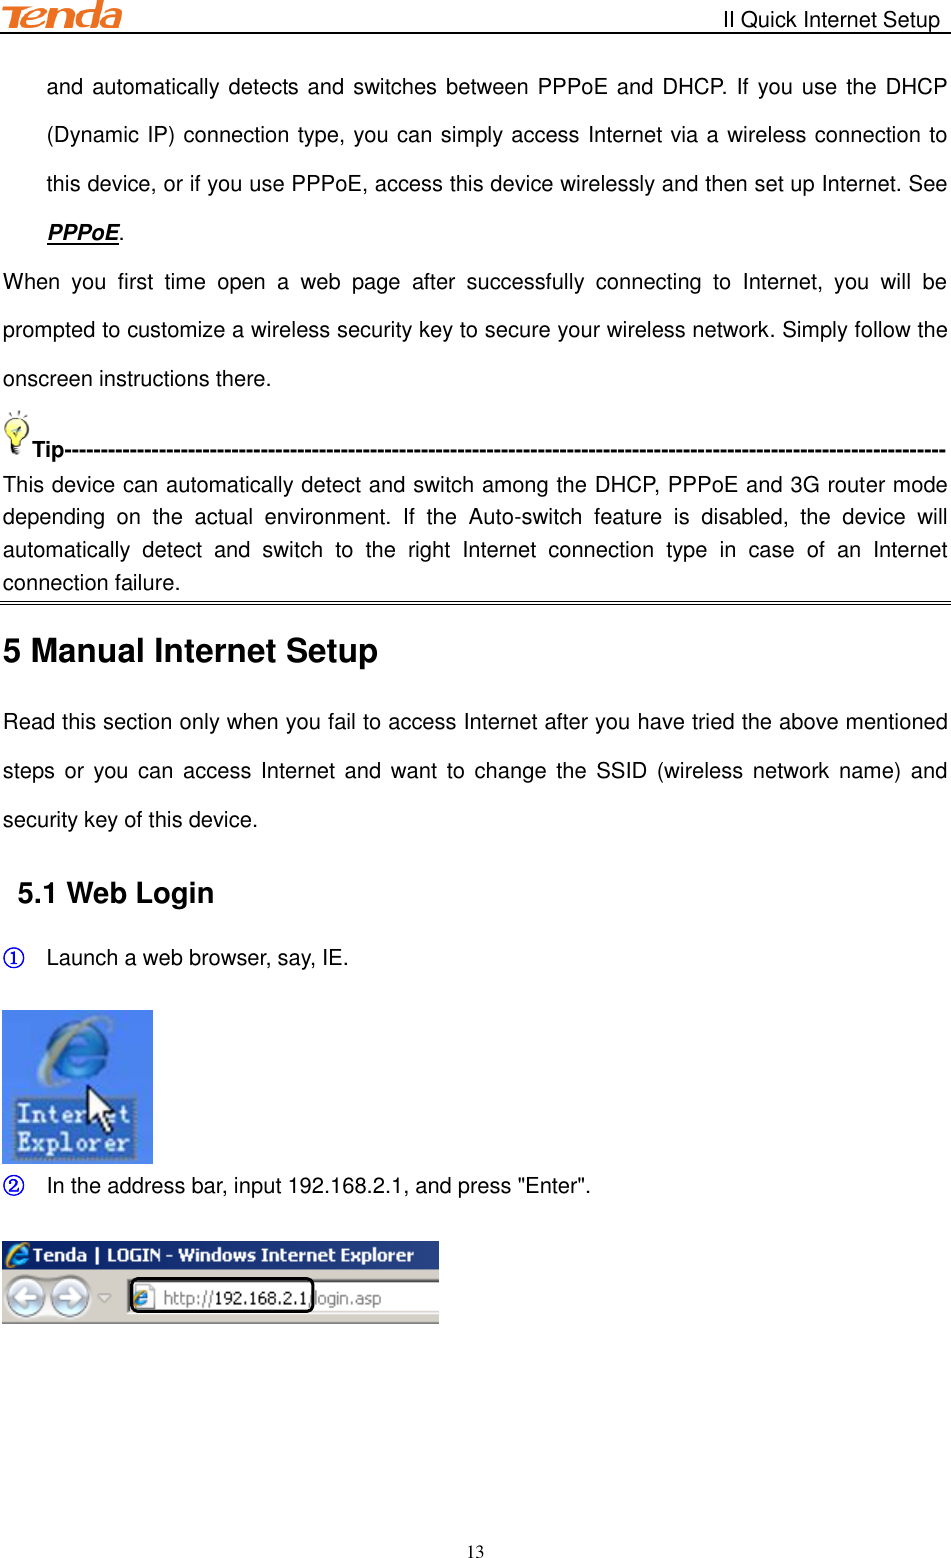                                                        II Quick Internet Setup         13 and automatically detects and switches between PPPoE and DHCP. If you use the DHCP (Dynamic IP) connection type, you can simply access Internet via a wireless connection to this device, or if you use PPPoE, access this device wirelessly and then set up Internet. See PPPoE. When  you  first  time  open  a  web  page  after  successfully  connecting  to  Internet,  you  will  be prompted to customize a wireless security key to secure your wireless network. Simply follow the onscreen instructions there. Tip------------------------------------------------------------------------------------------------------------------------- This device can automatically detect and switch among the DHCP, PPPoE and 3G router mode depending  on  the  actual  environment.  If  the  Auto-switch  feature  is  disabled,  the  device  will automatically  detect  and  switch  to  the  right  Internet  connection  type  in  case  of  an  Internet connection failure. 5 Manual Internet Setup Read this section only when you fail to access Internet after you have tried the above mentioned steps or  you can  access  Internet and  want to  change  the SSID (wireless network name) and security key of this device.   5.1 Web Login ① Launch a web browser, say, IE.   ② In the address bar, input 192.168.2.1, and press &quot;Enter&quot;.   